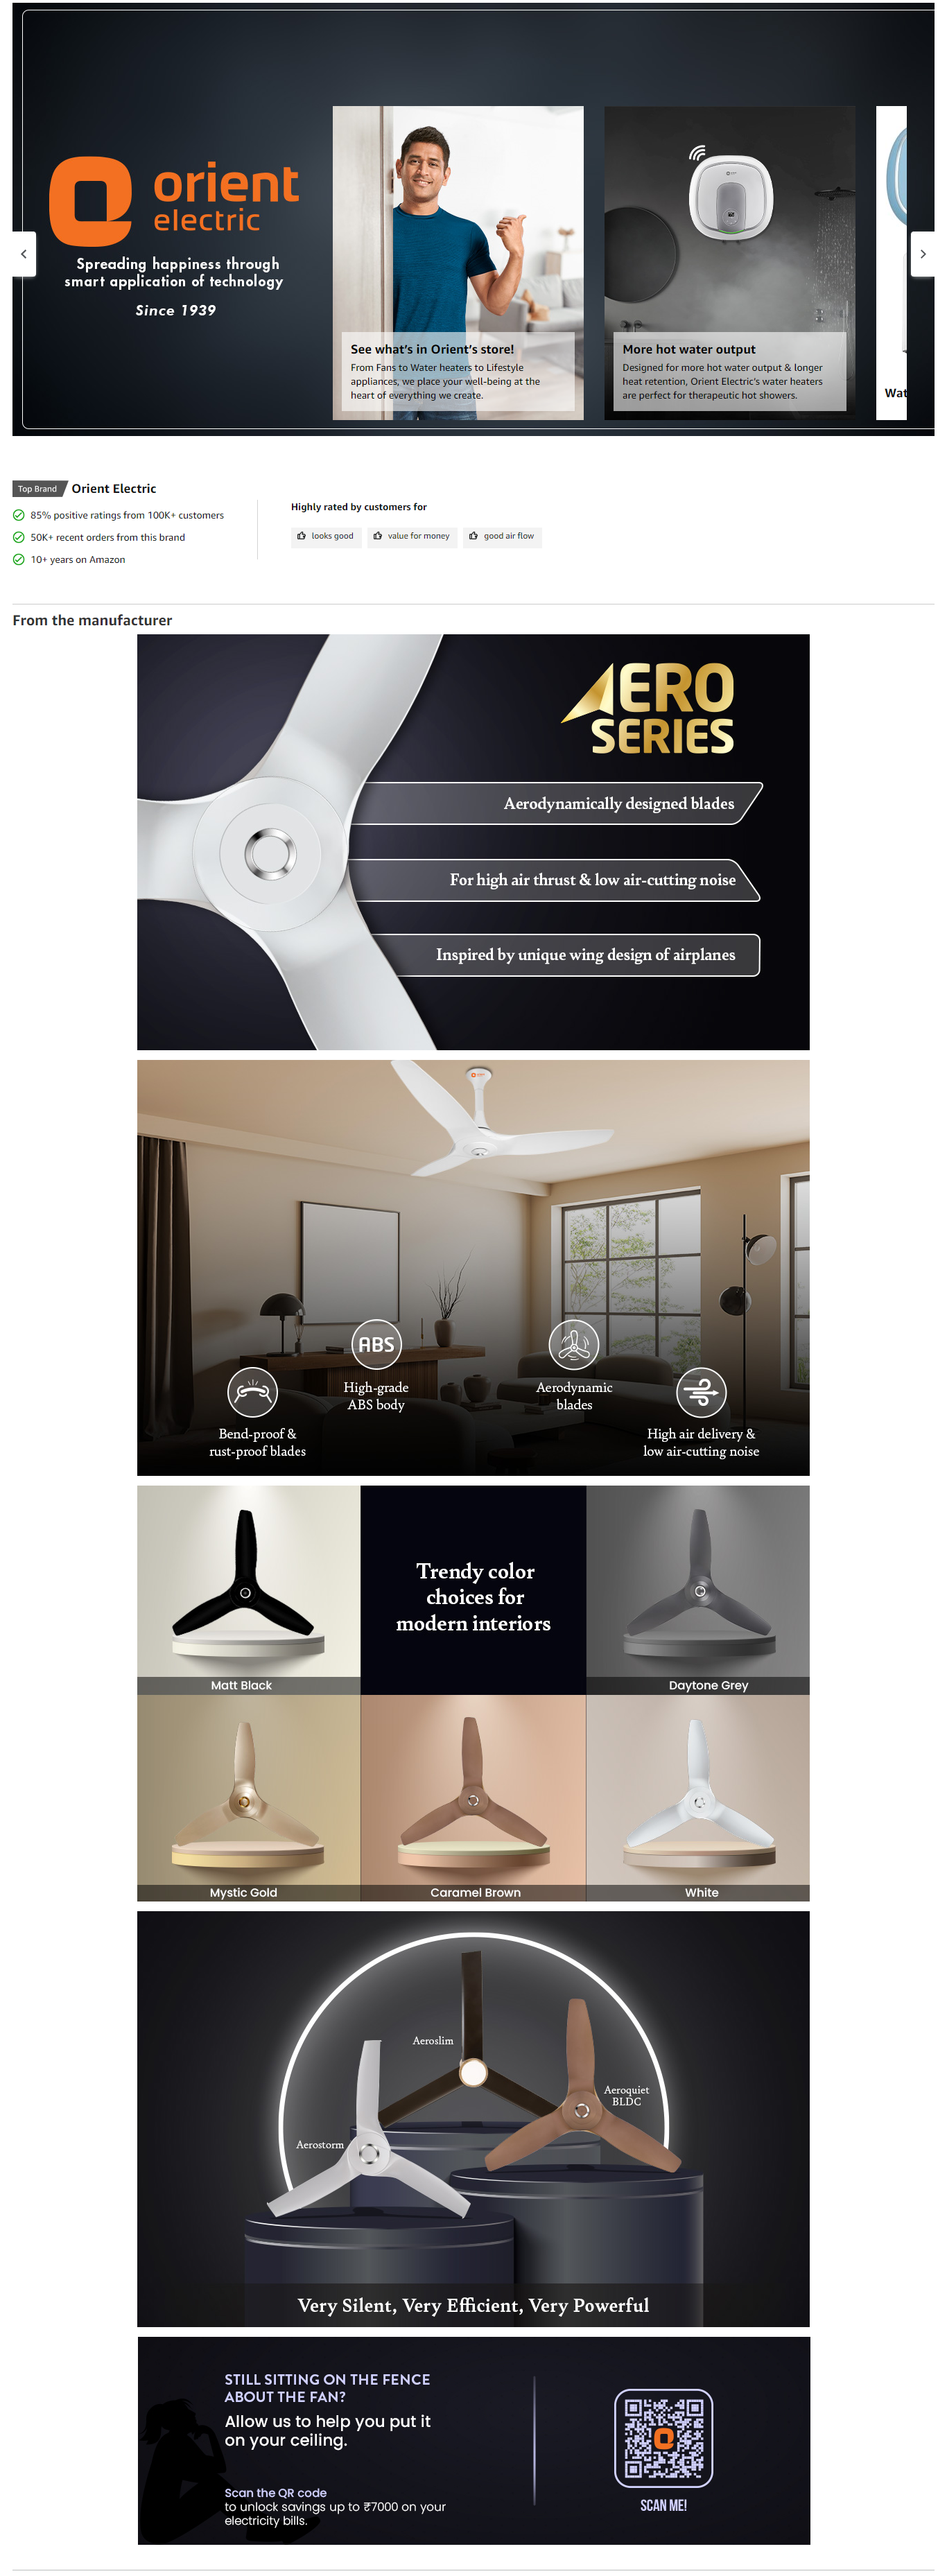 Orient Electric 1200 mm 5-star ceiling fan (48AEROQUIETBLDCWREMO)